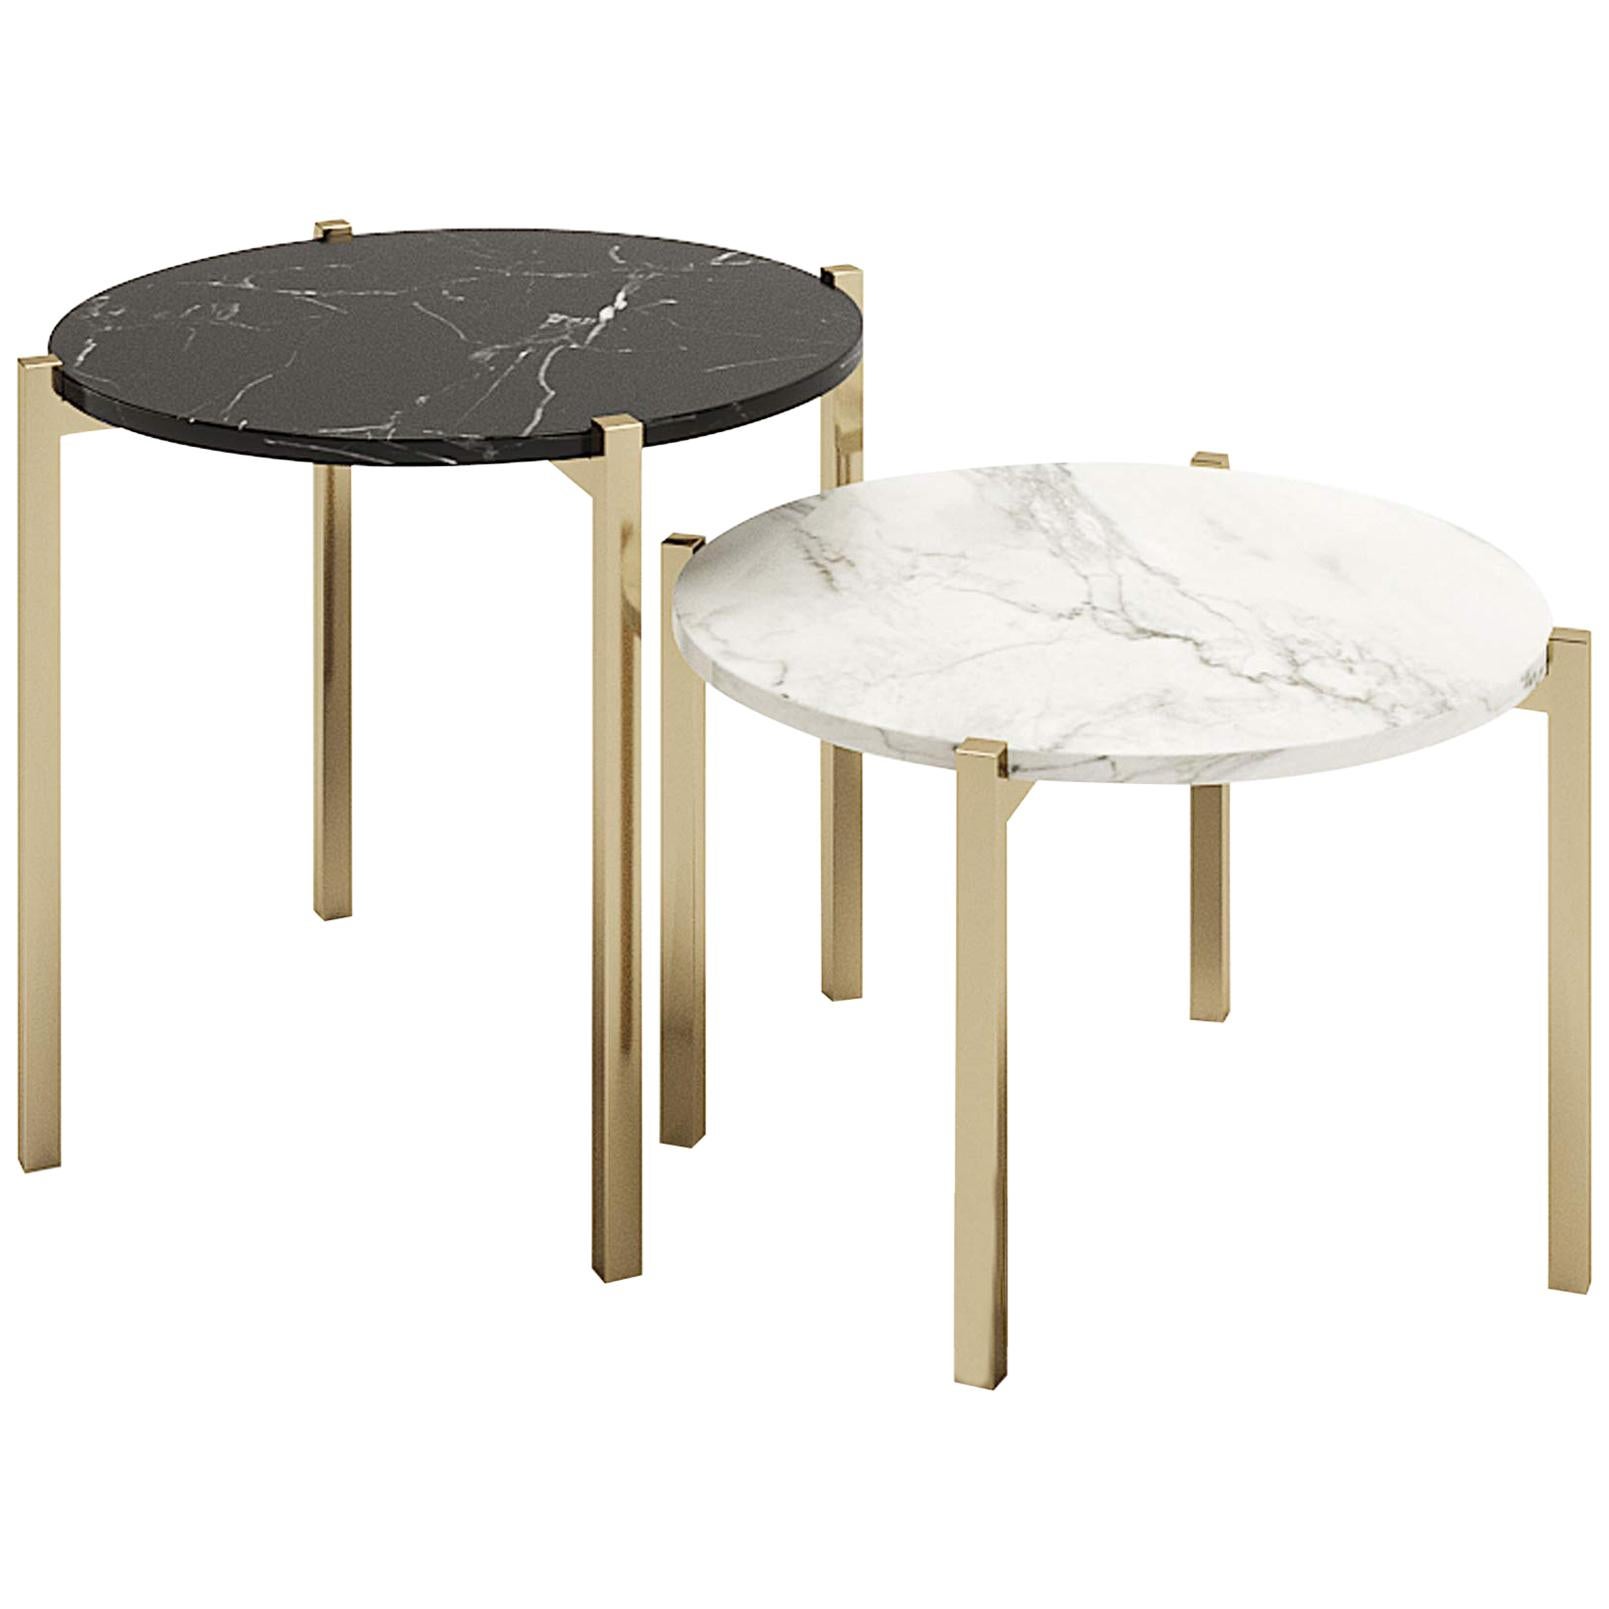 Set of Round Table, Design Style, Round Side Table with Coated Metal Legs For Sale